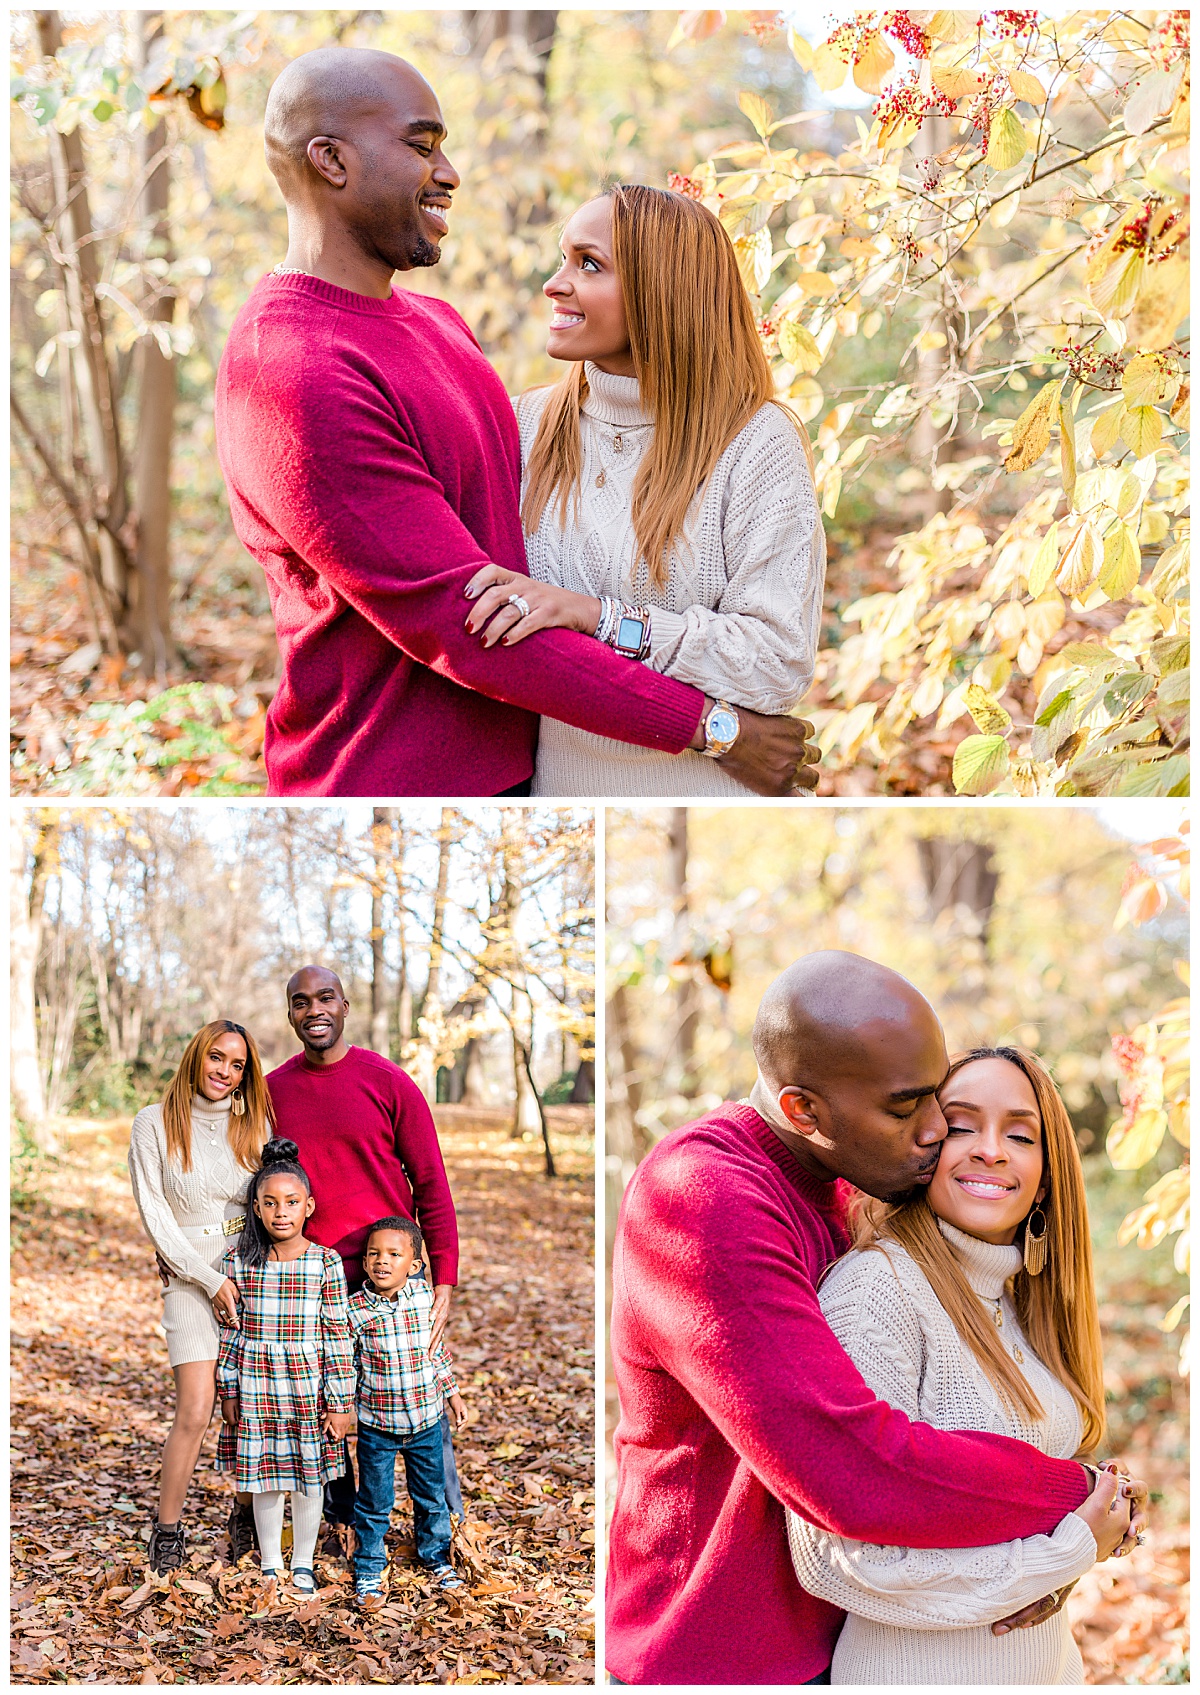 Fall family portraits for family of four with a boy and girl at Awbury Arboretum in Philadelphia, PA taken by Ann Blake Photography.